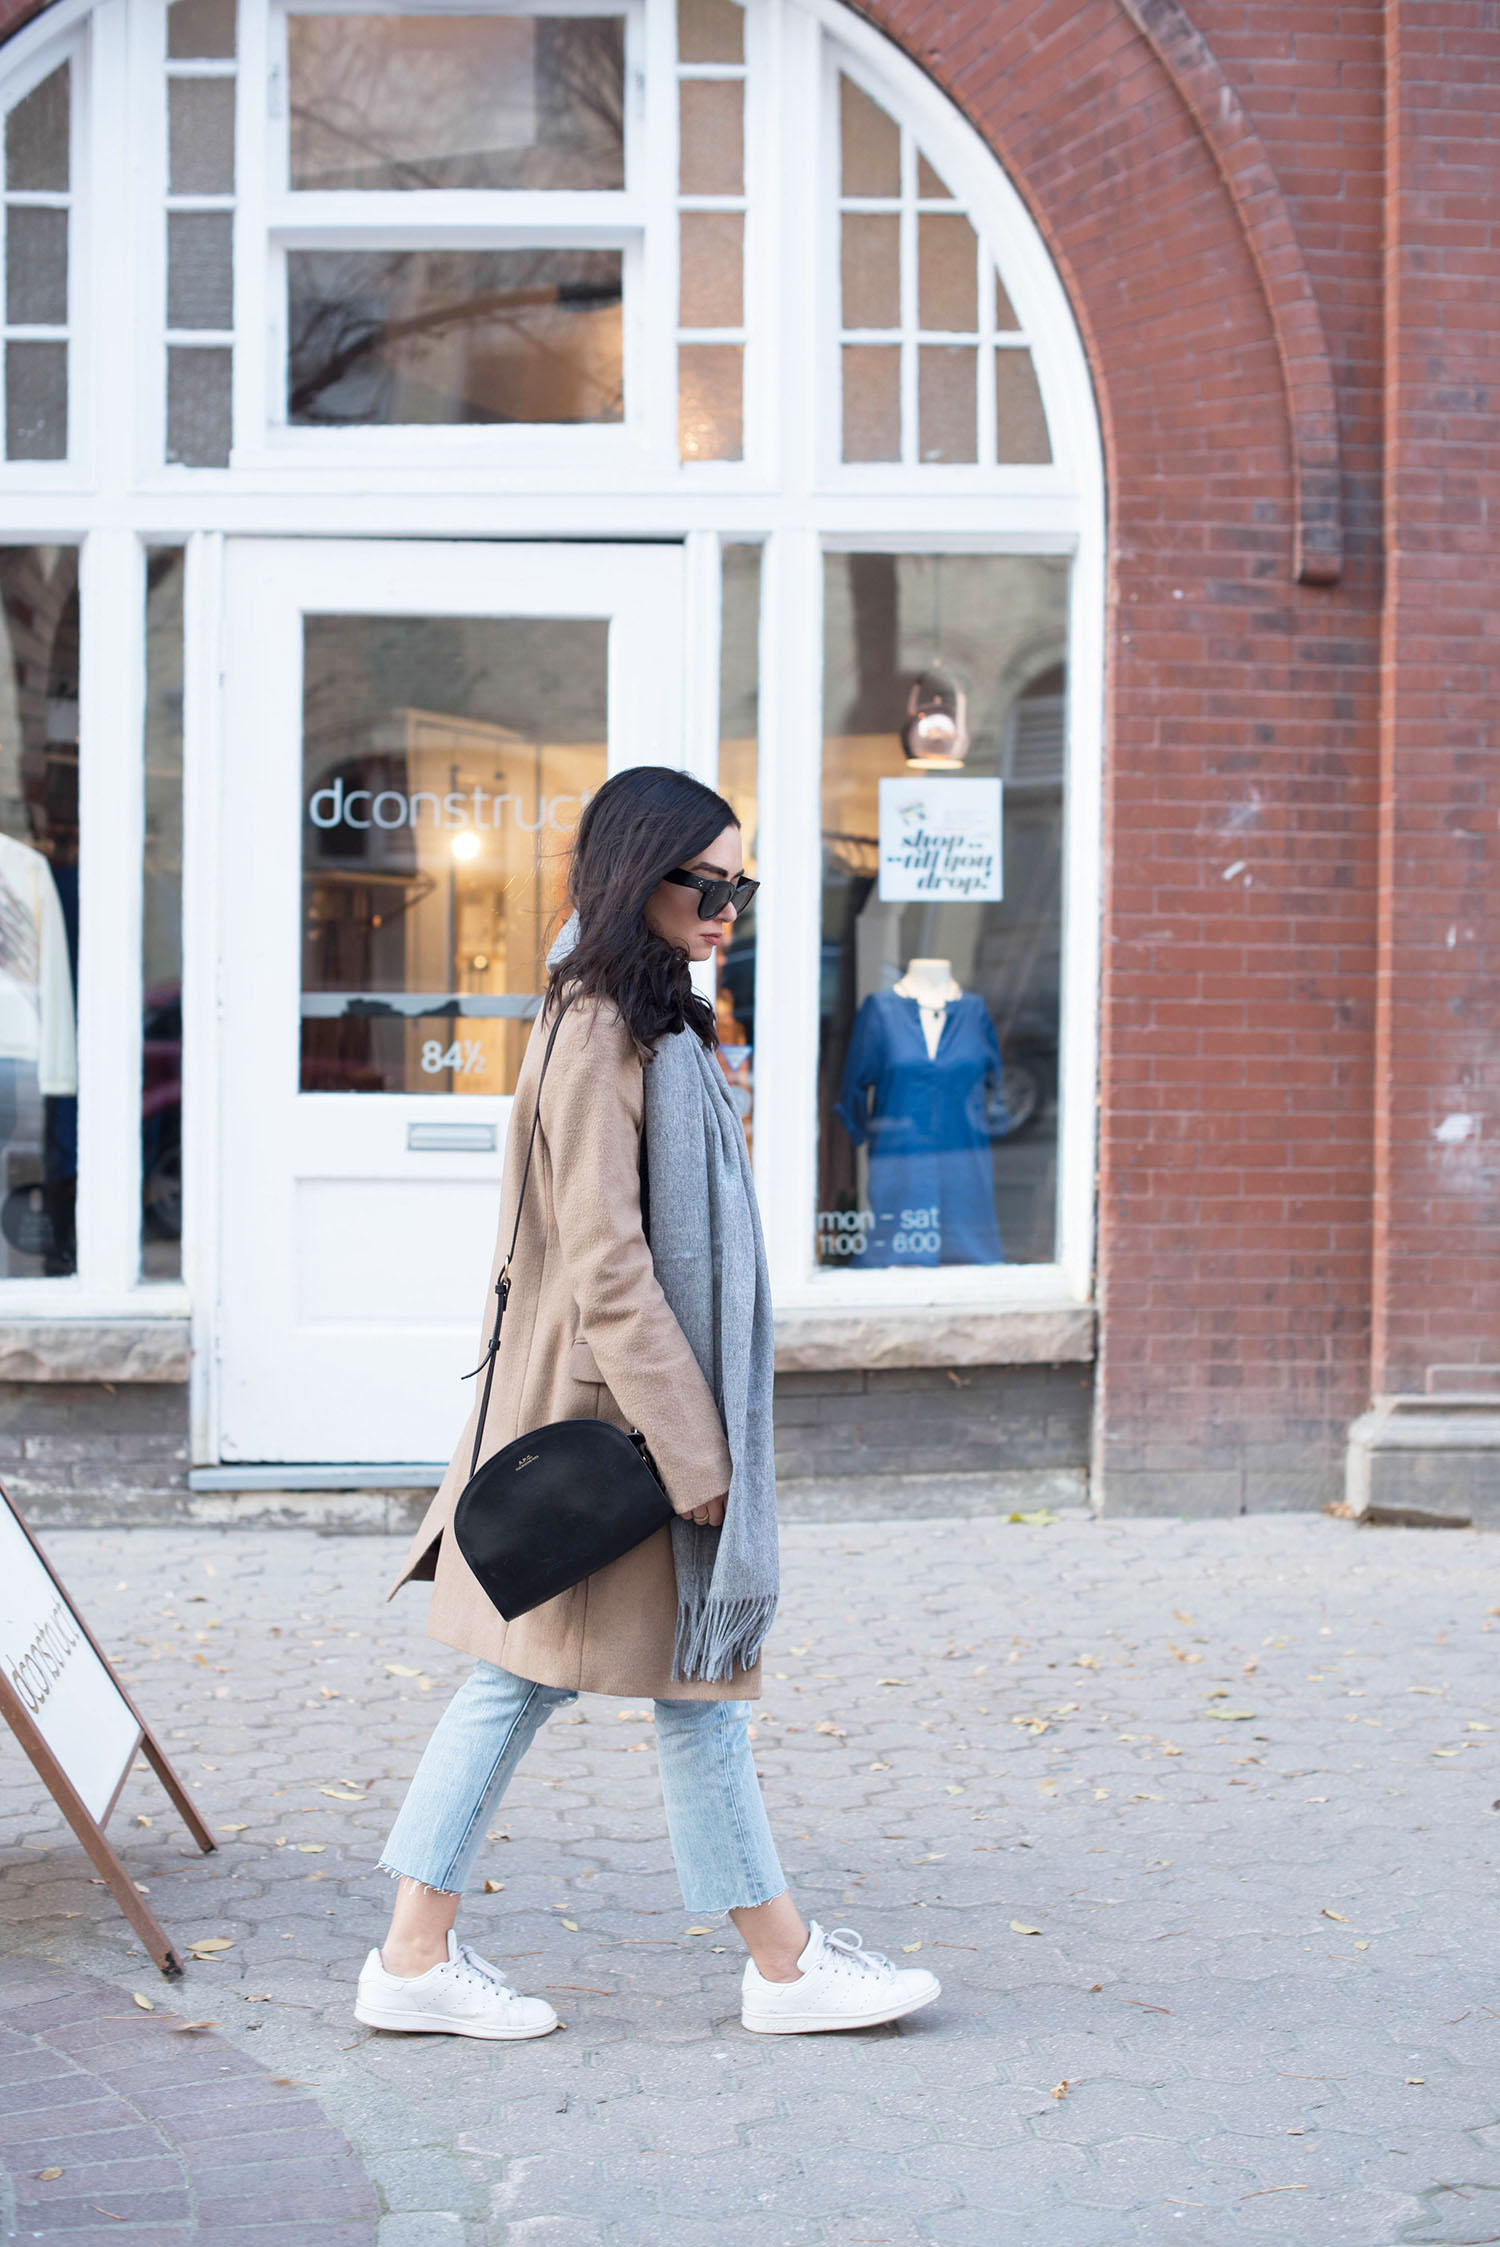 Winnipeg fashion blogger Cee Fardoe of Coco & Vera walks the streets of The Exchange District wearing a Uniqlo camel coat and carrying an APC half moon bag